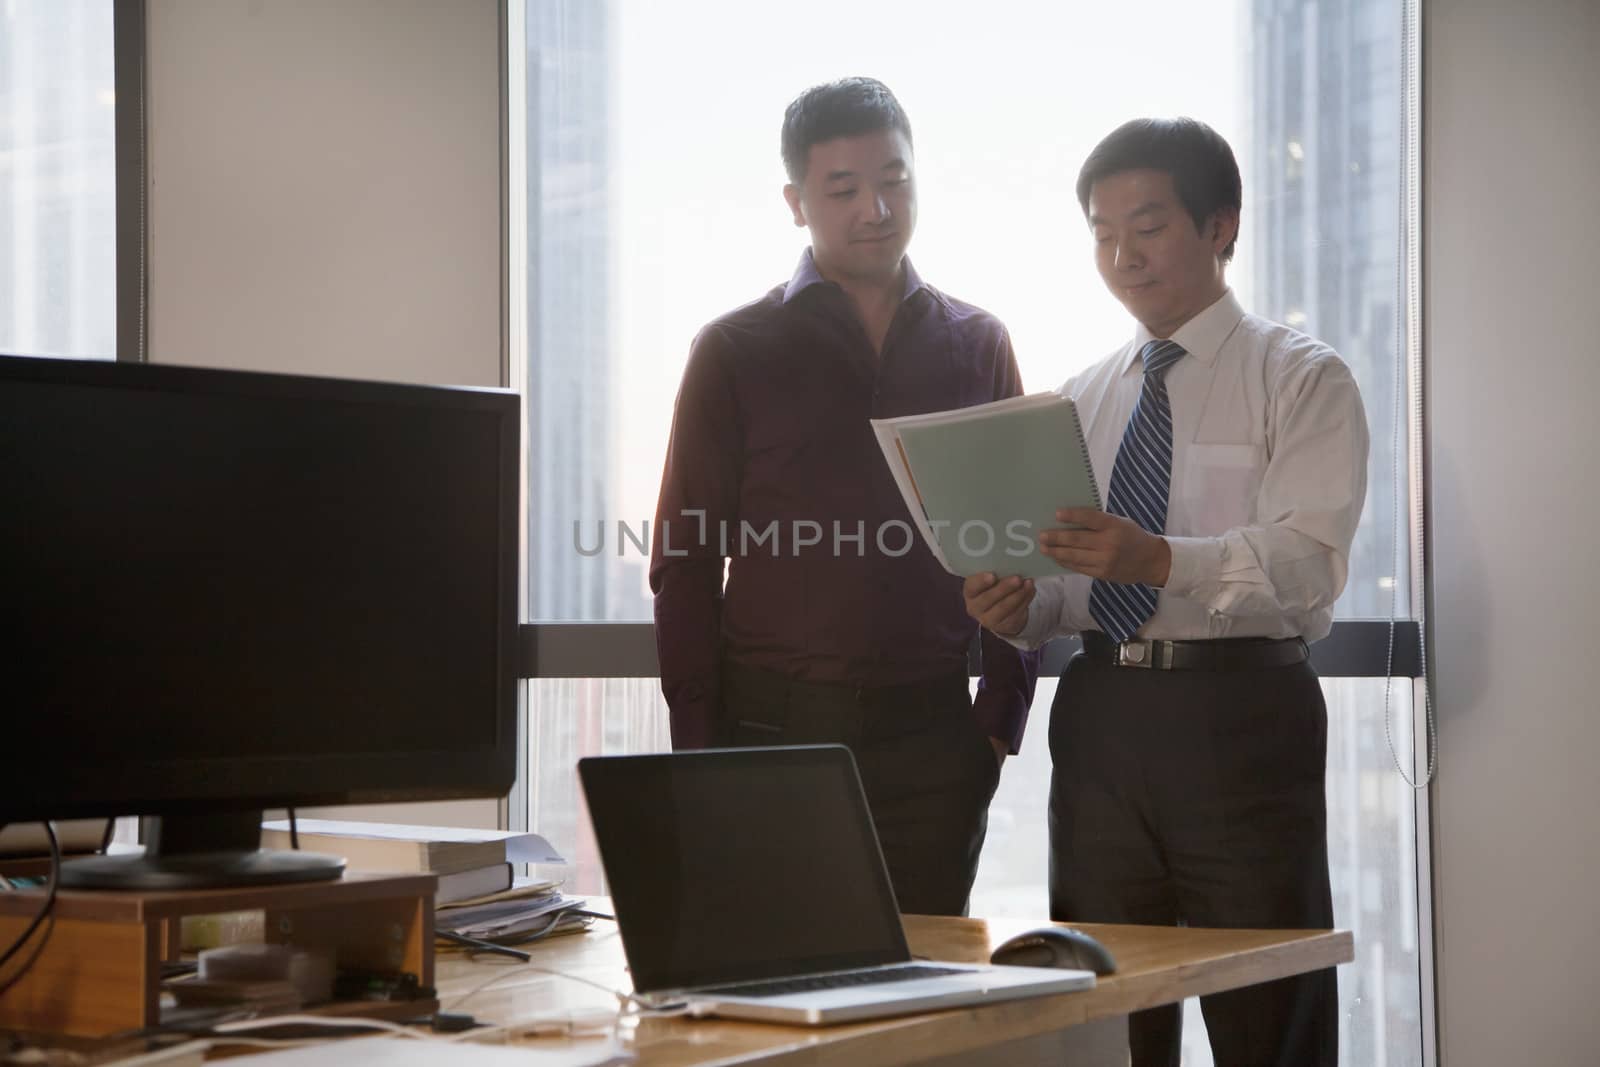 Two Businessmen Working Together in the Office